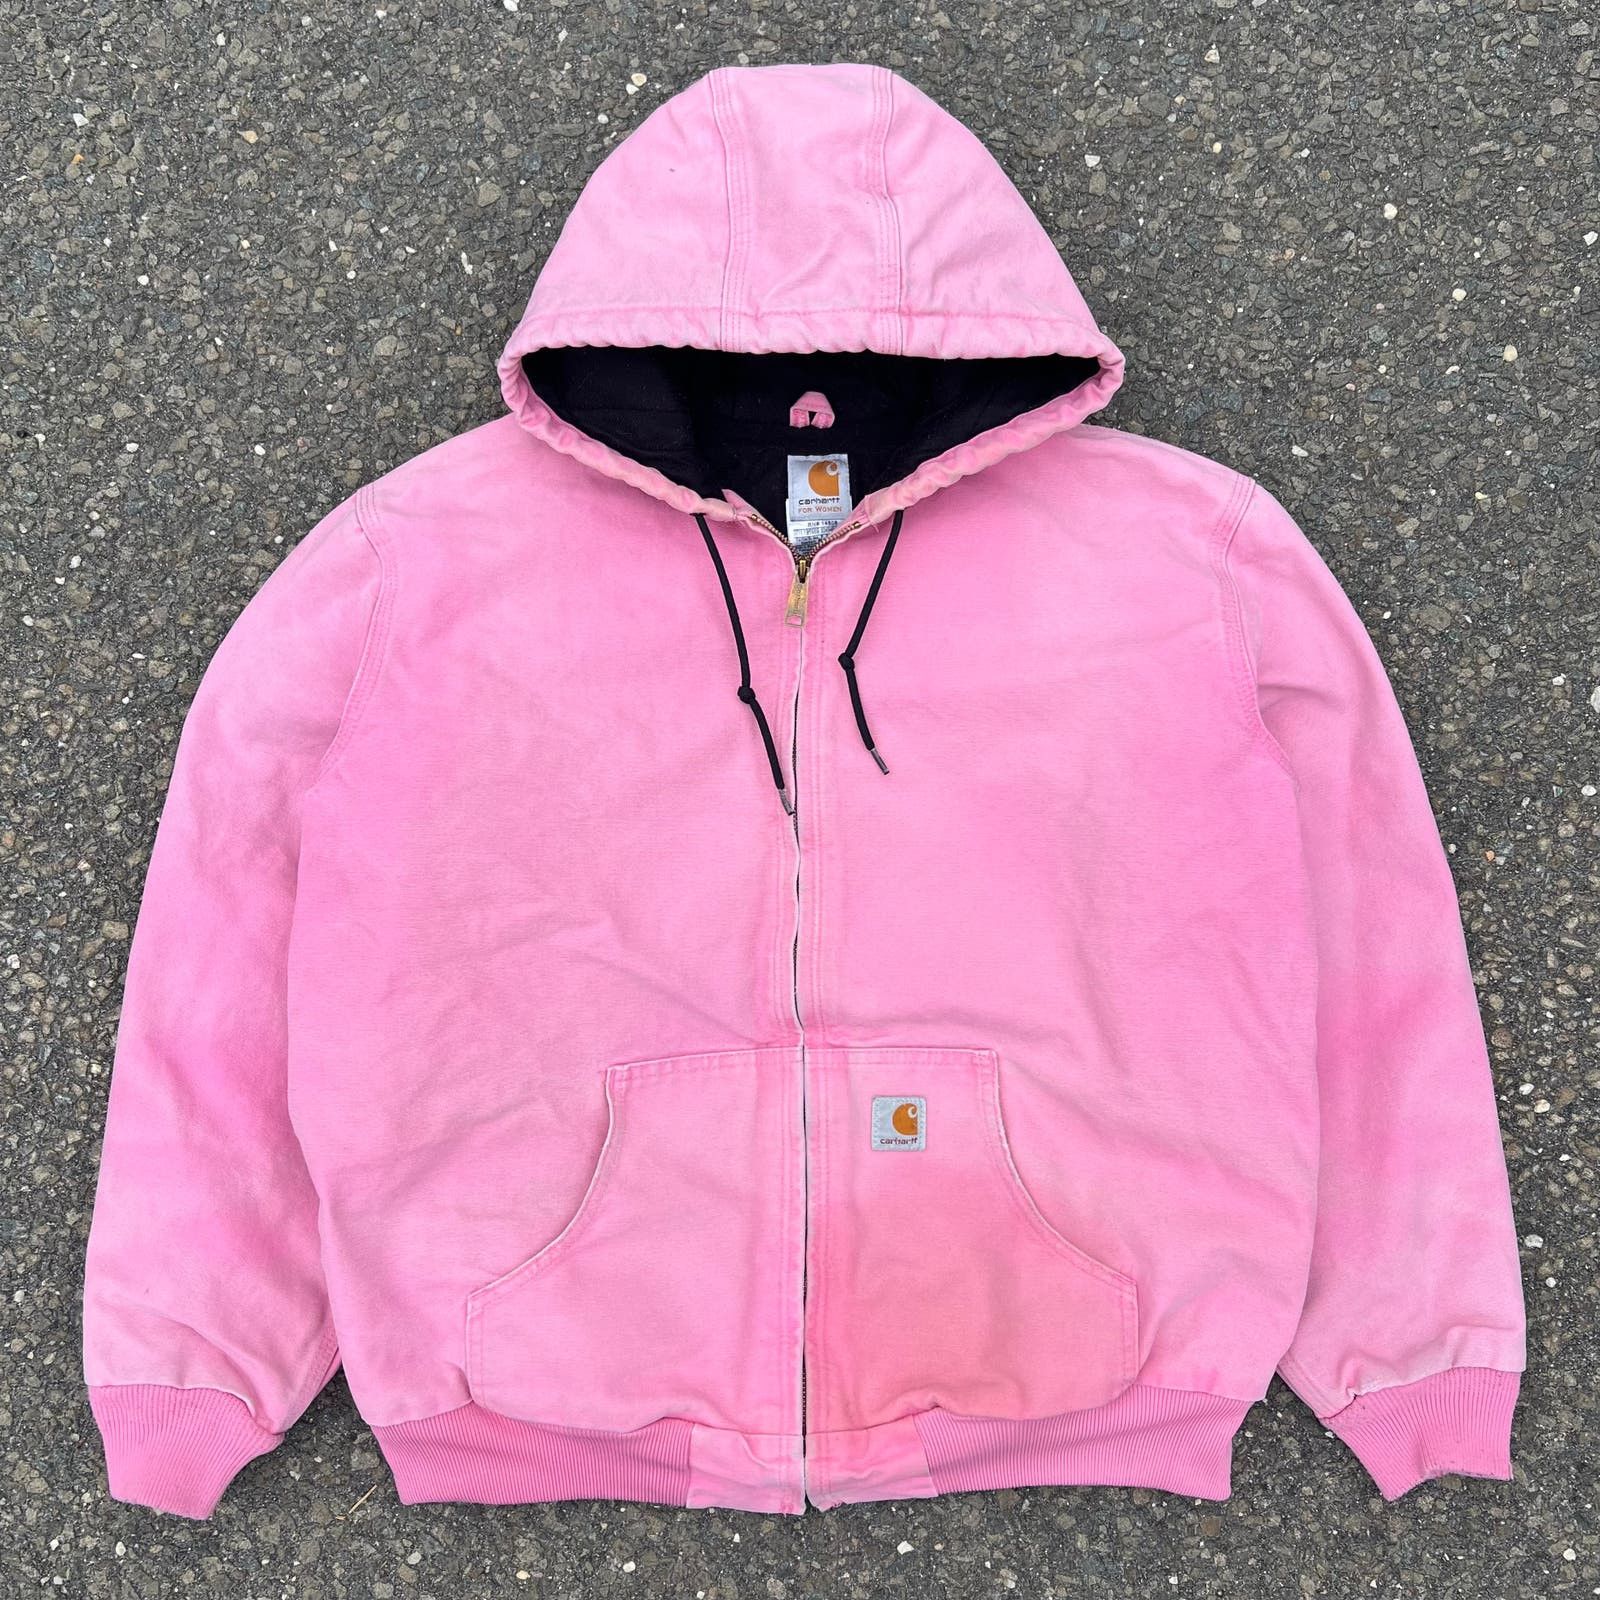 Pre-owned Carhartt X Vintage Crazy Faded Pink Carhartt Work Wear Hooded Jacket